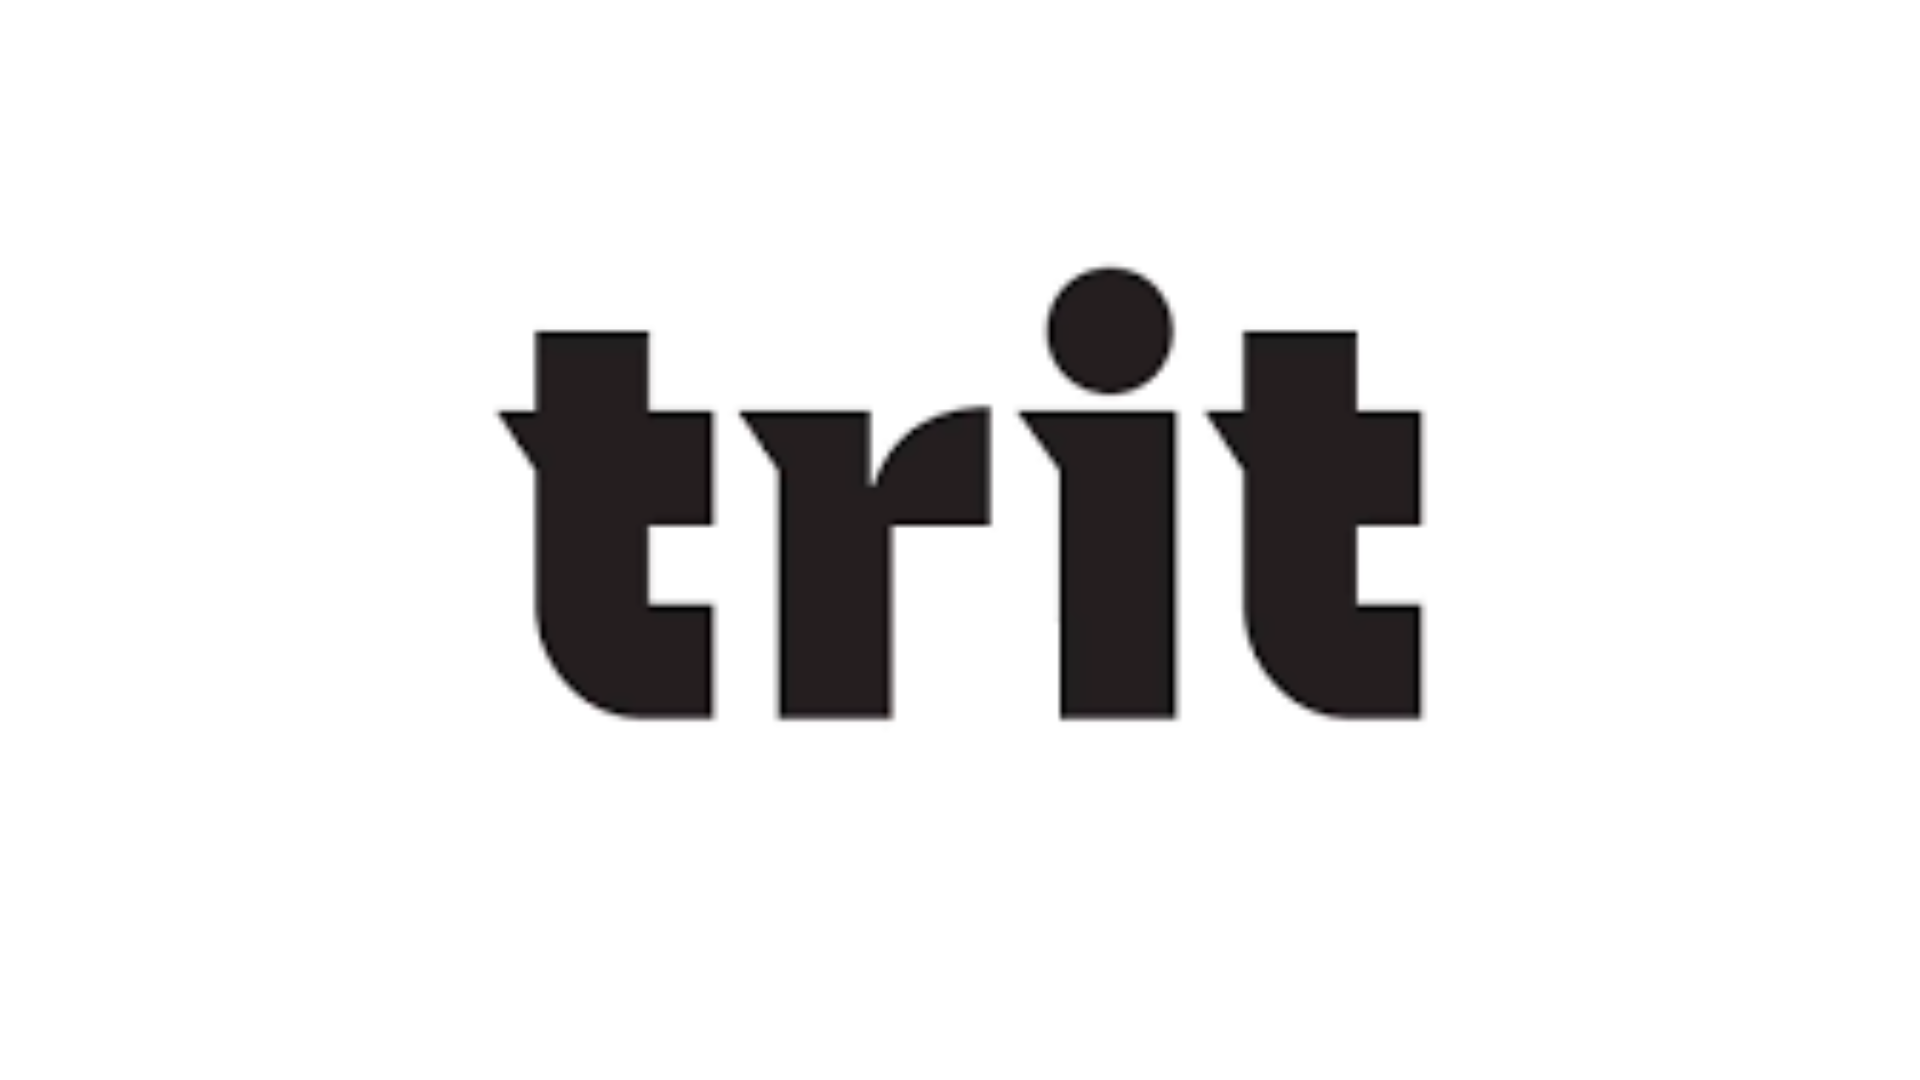 Get the White on White style by shopping with Trit